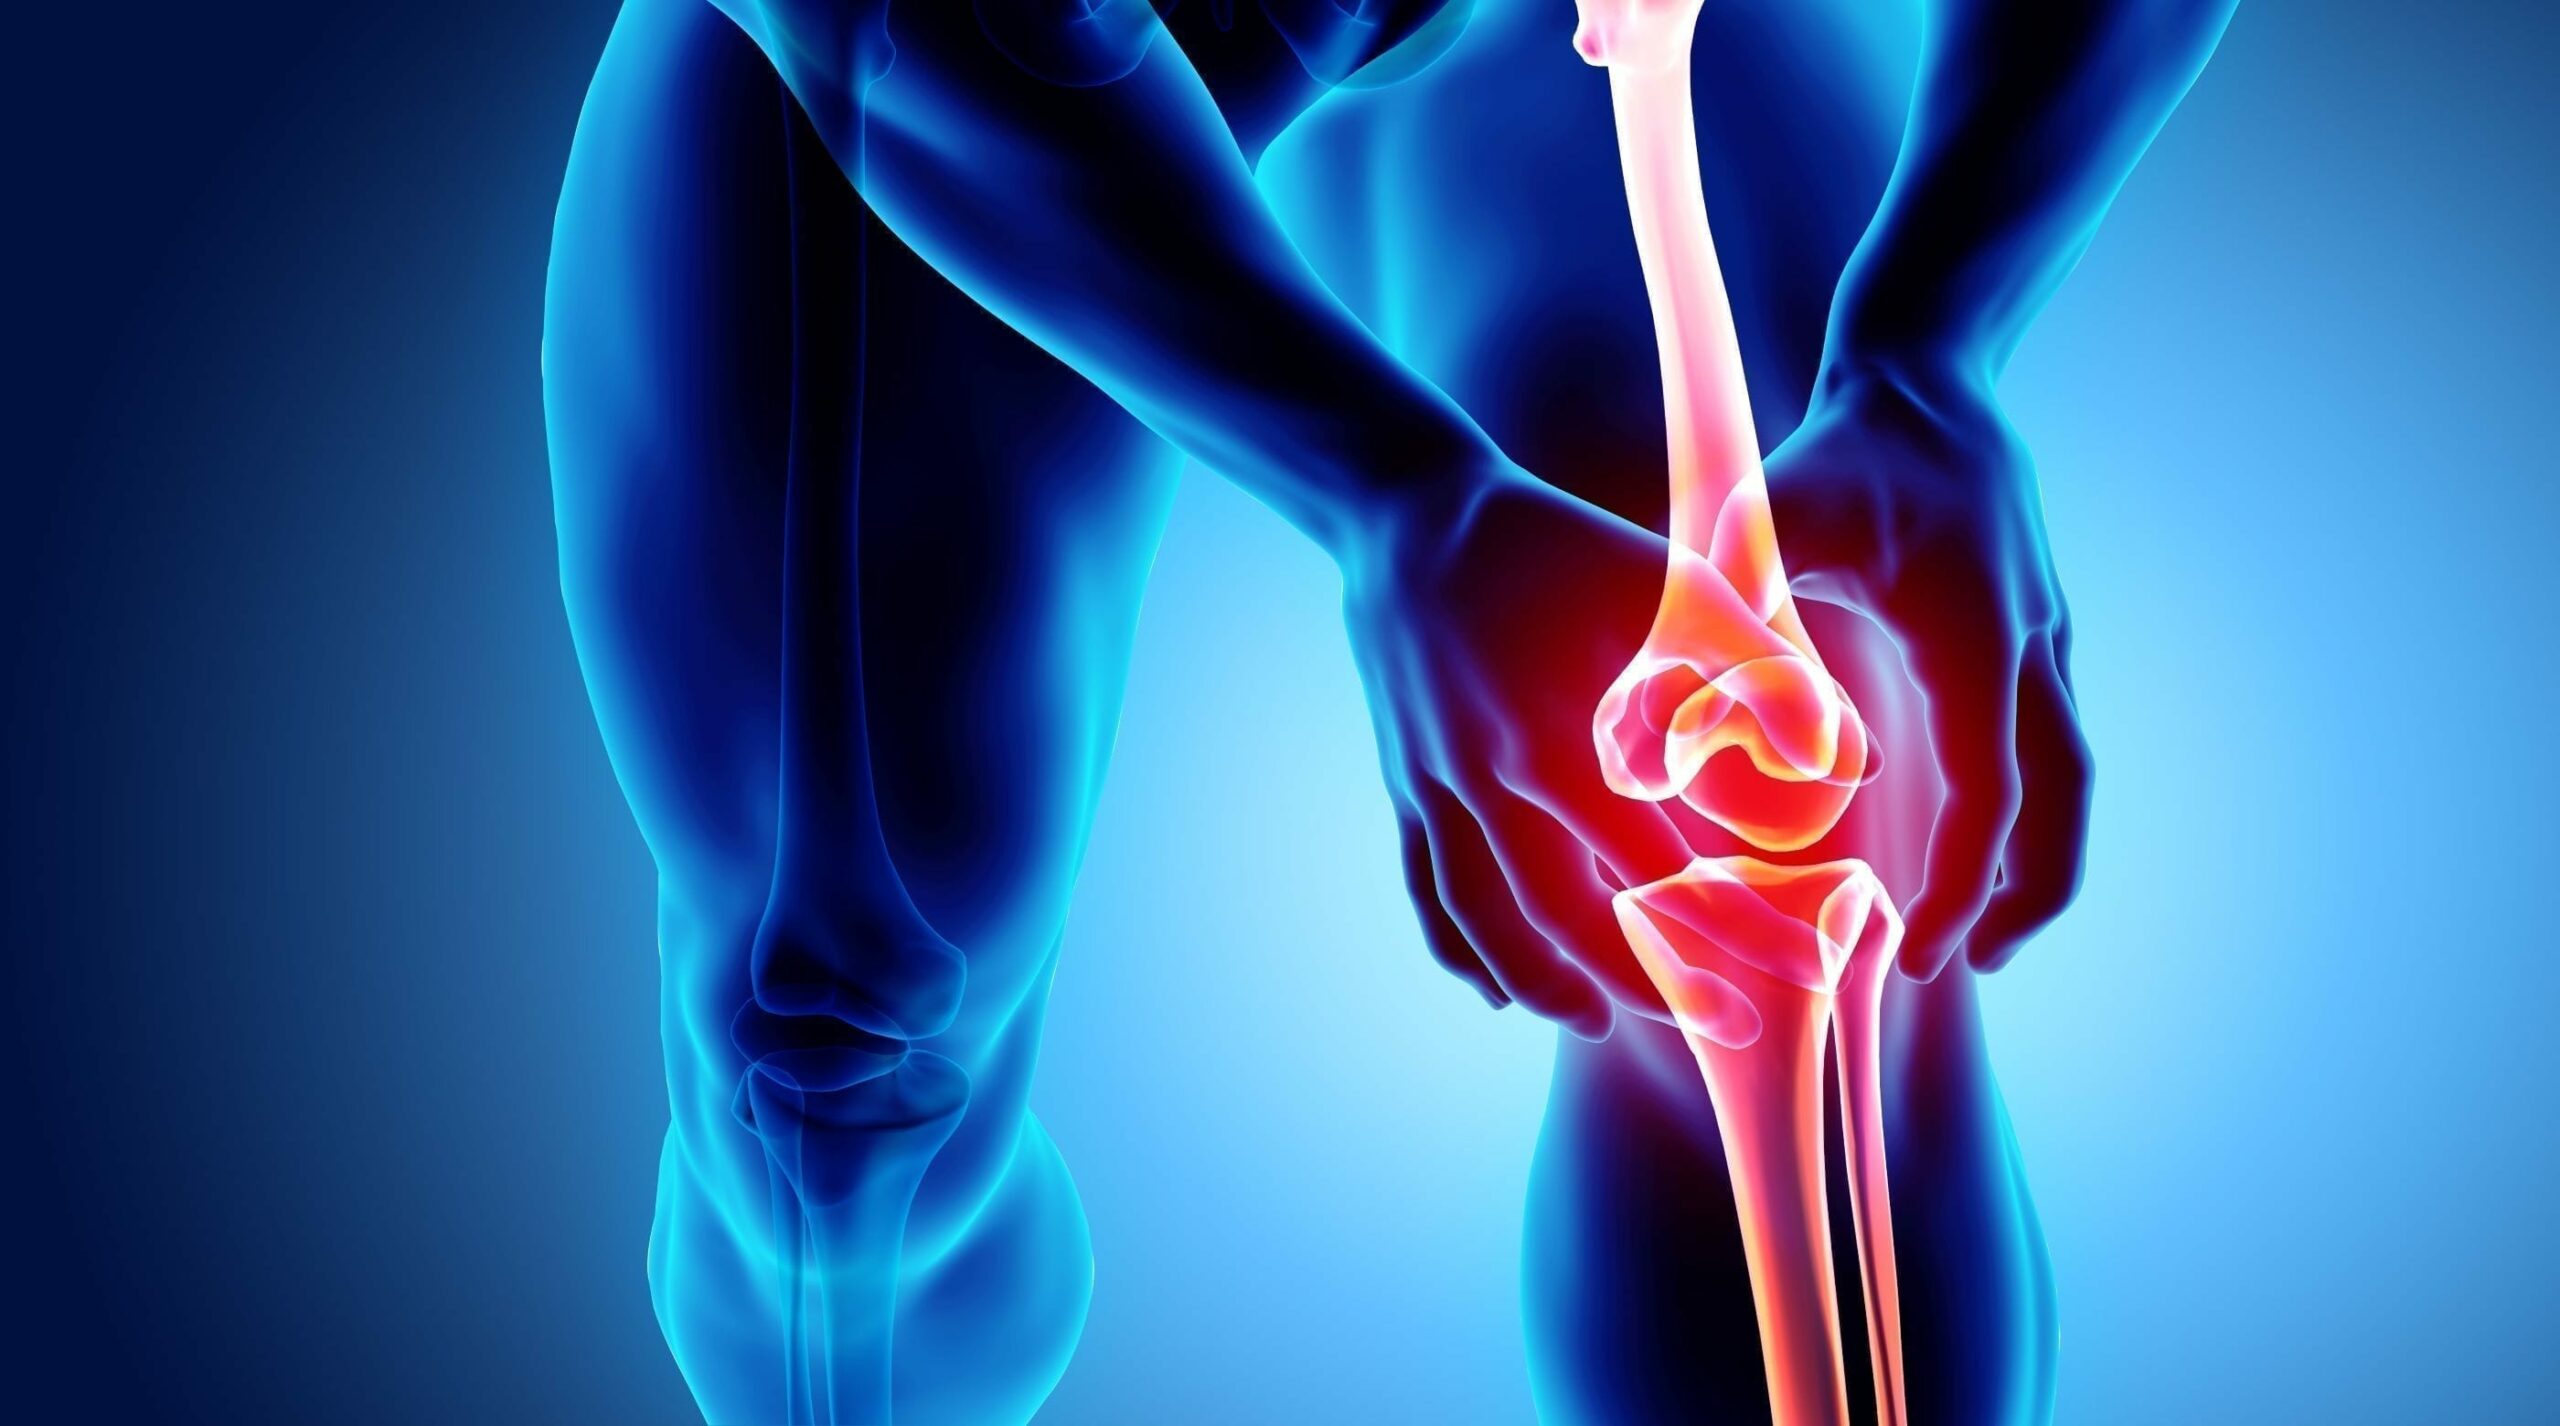 Advanced Topics in the Examination, Evaluation and Treatment of the Knee